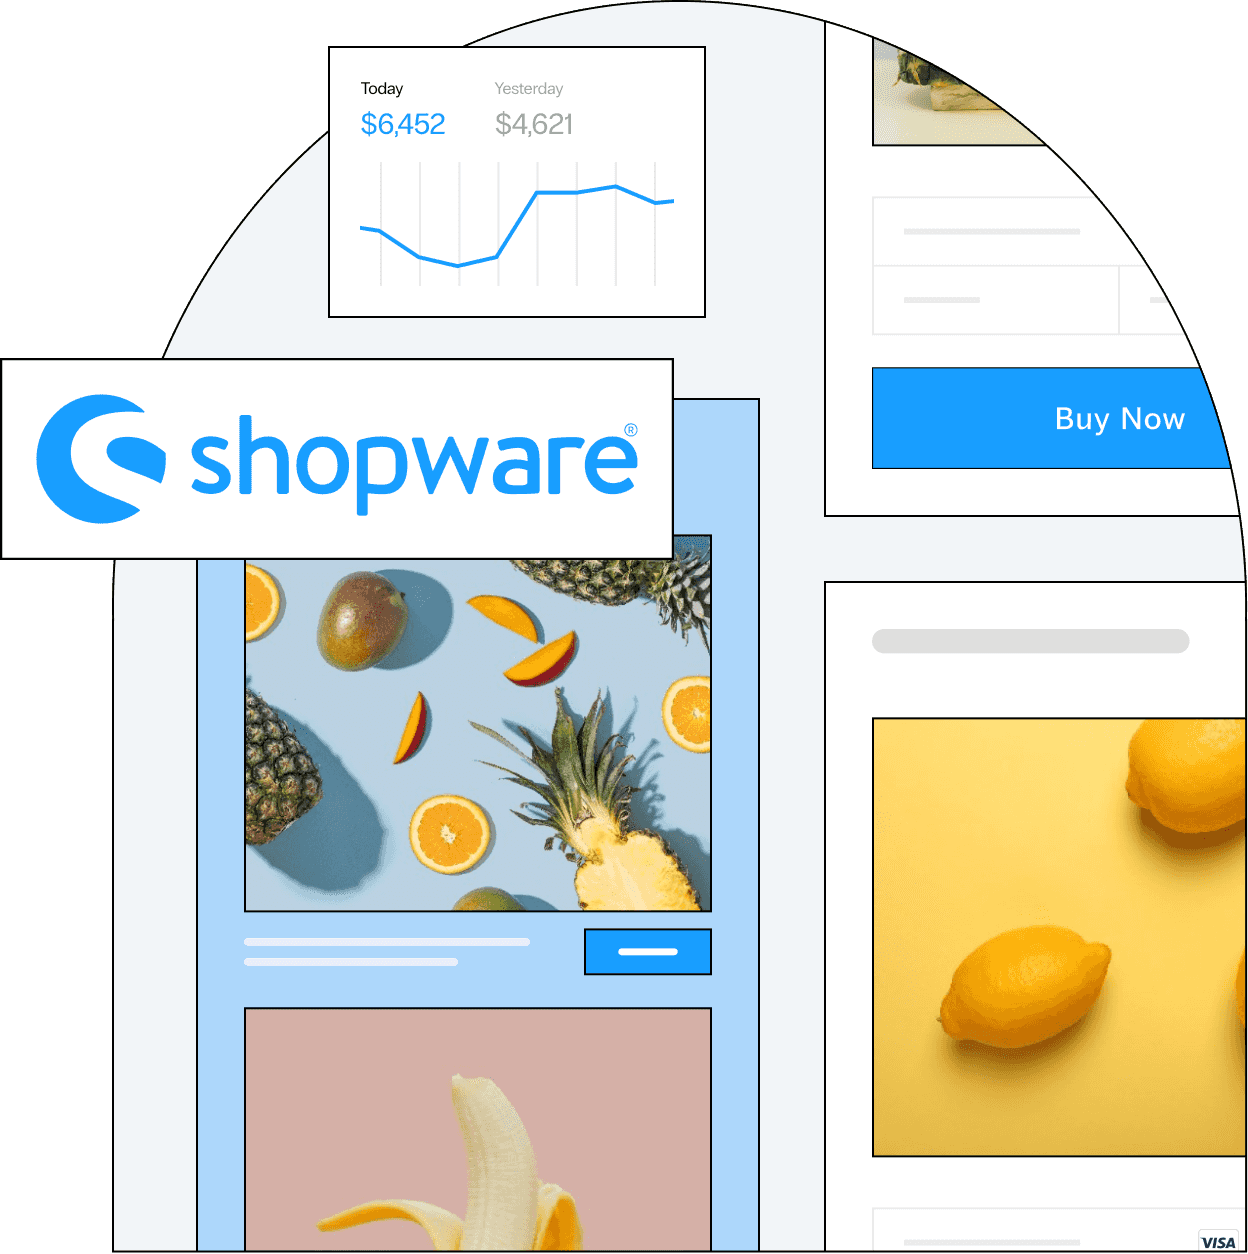 A hosted Shopware store sells fresh fruit, a chart tracks growing revenue from yesterday to today